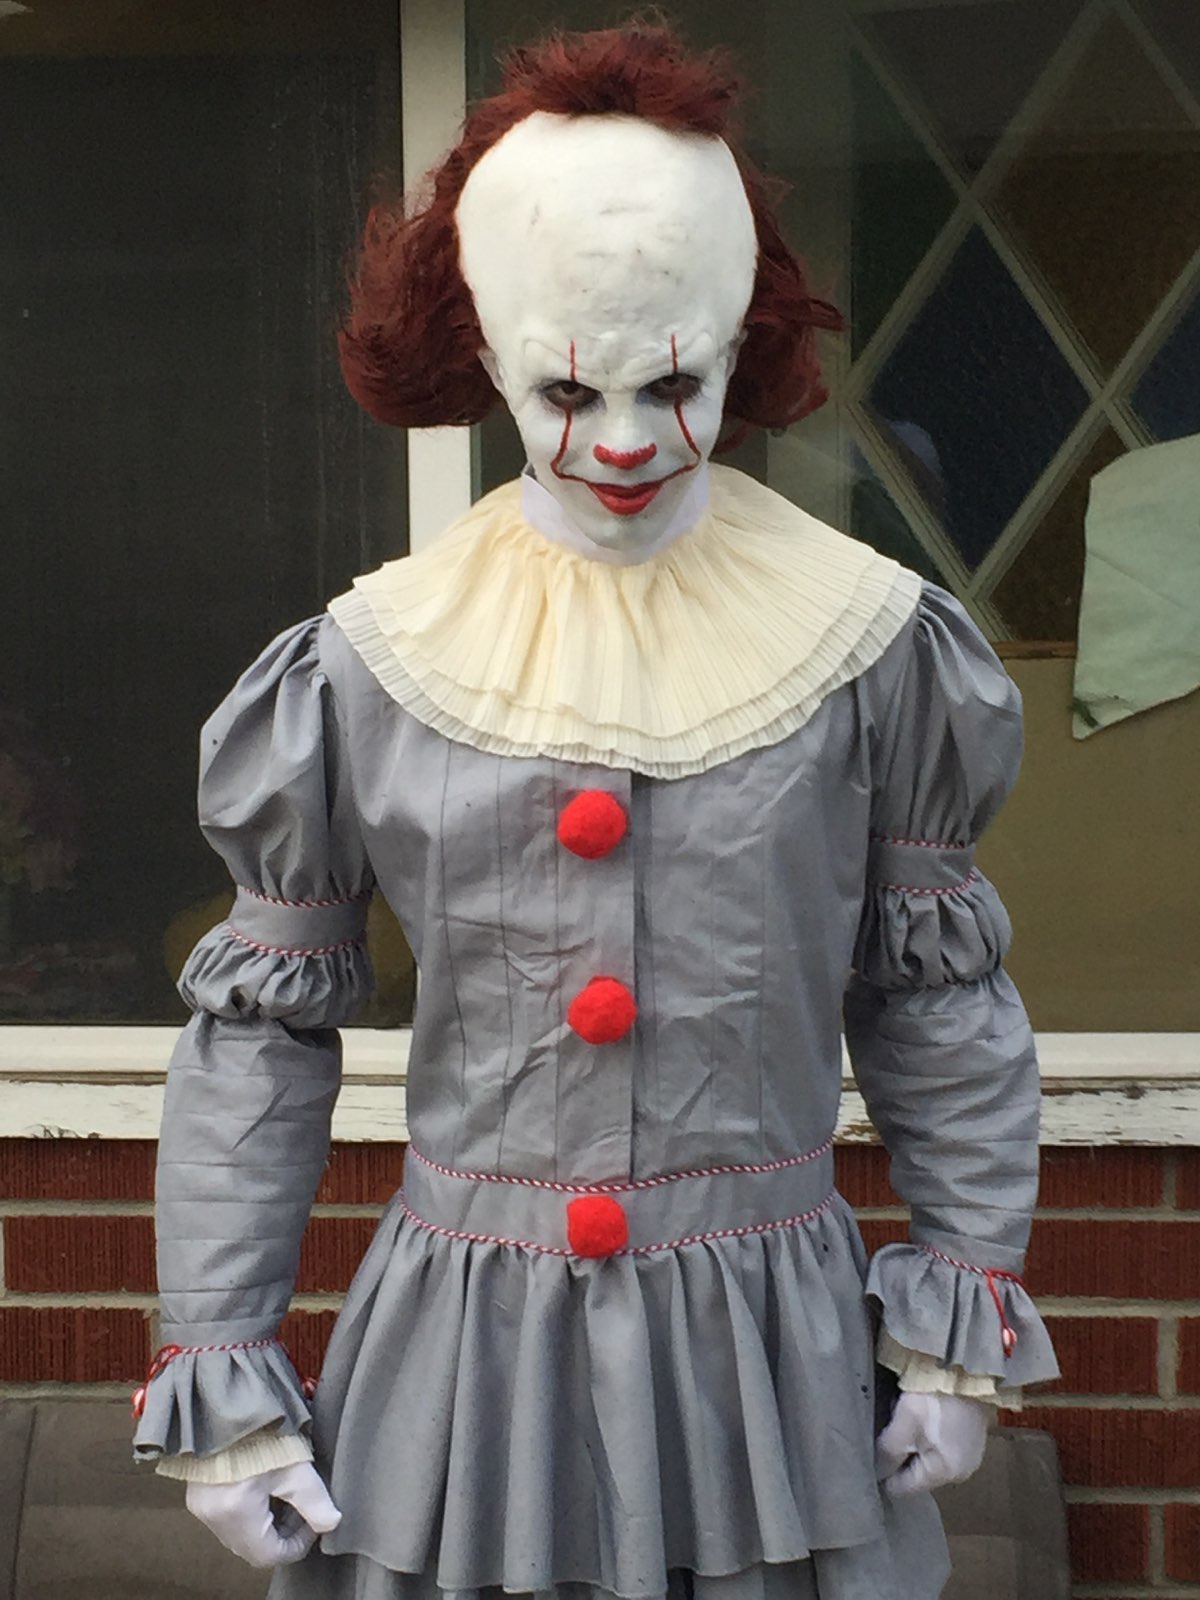 Pennywise - 2017